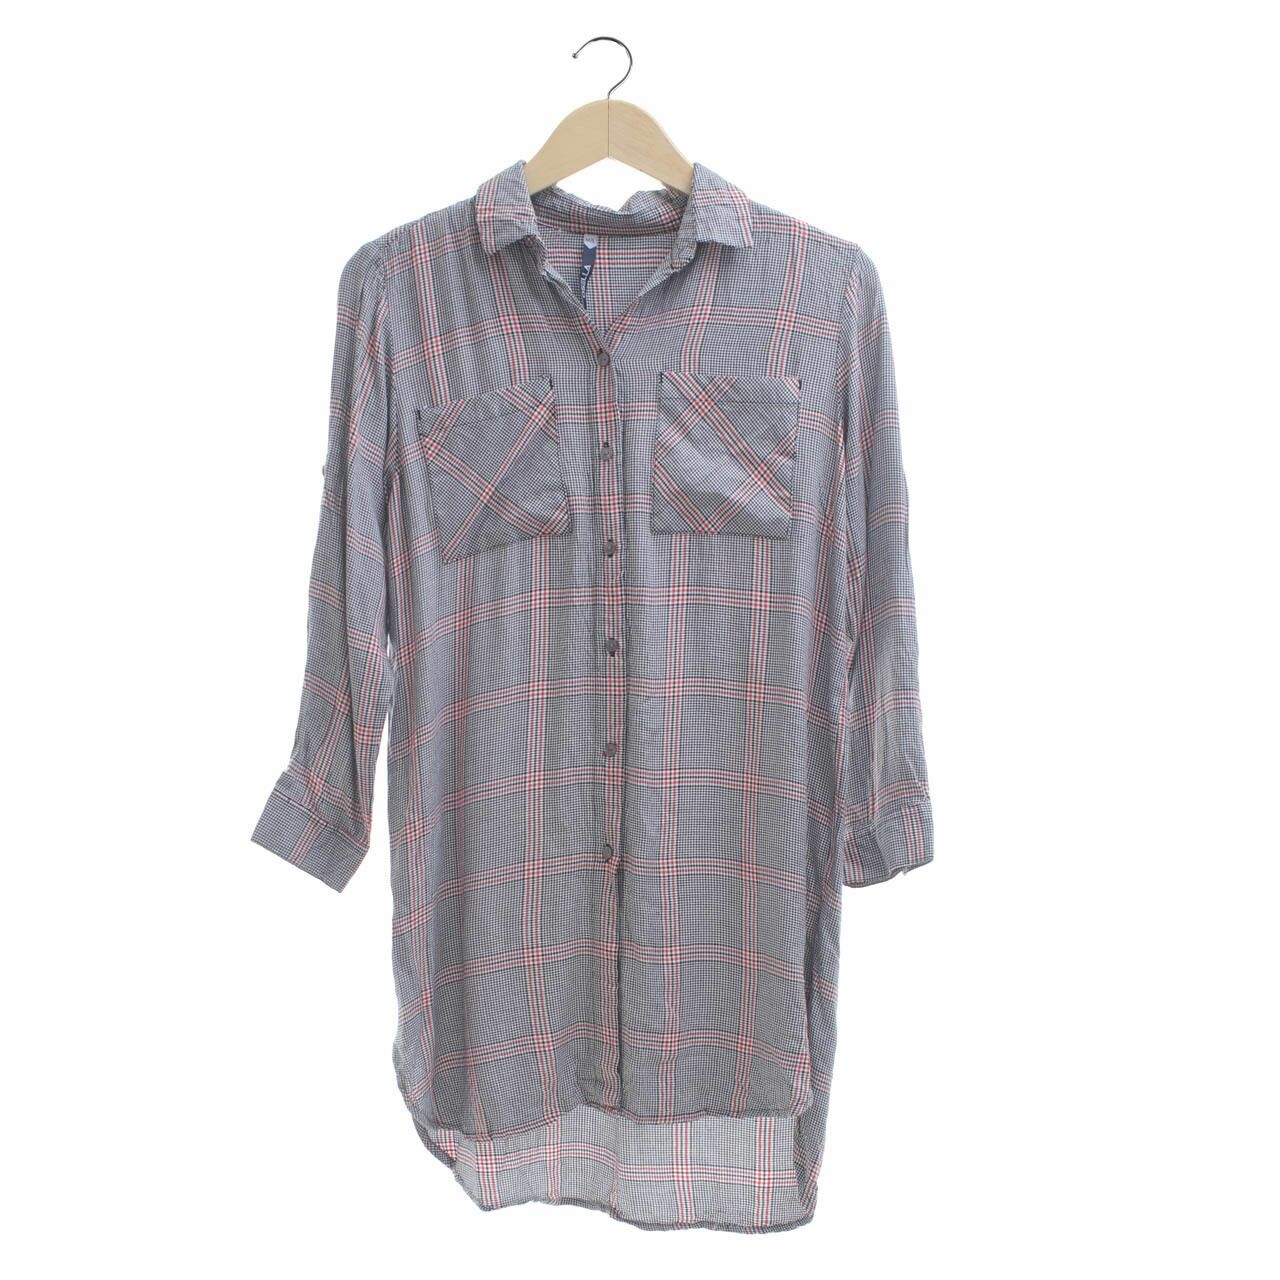 Private Collection Multi Houndstooth Shirt